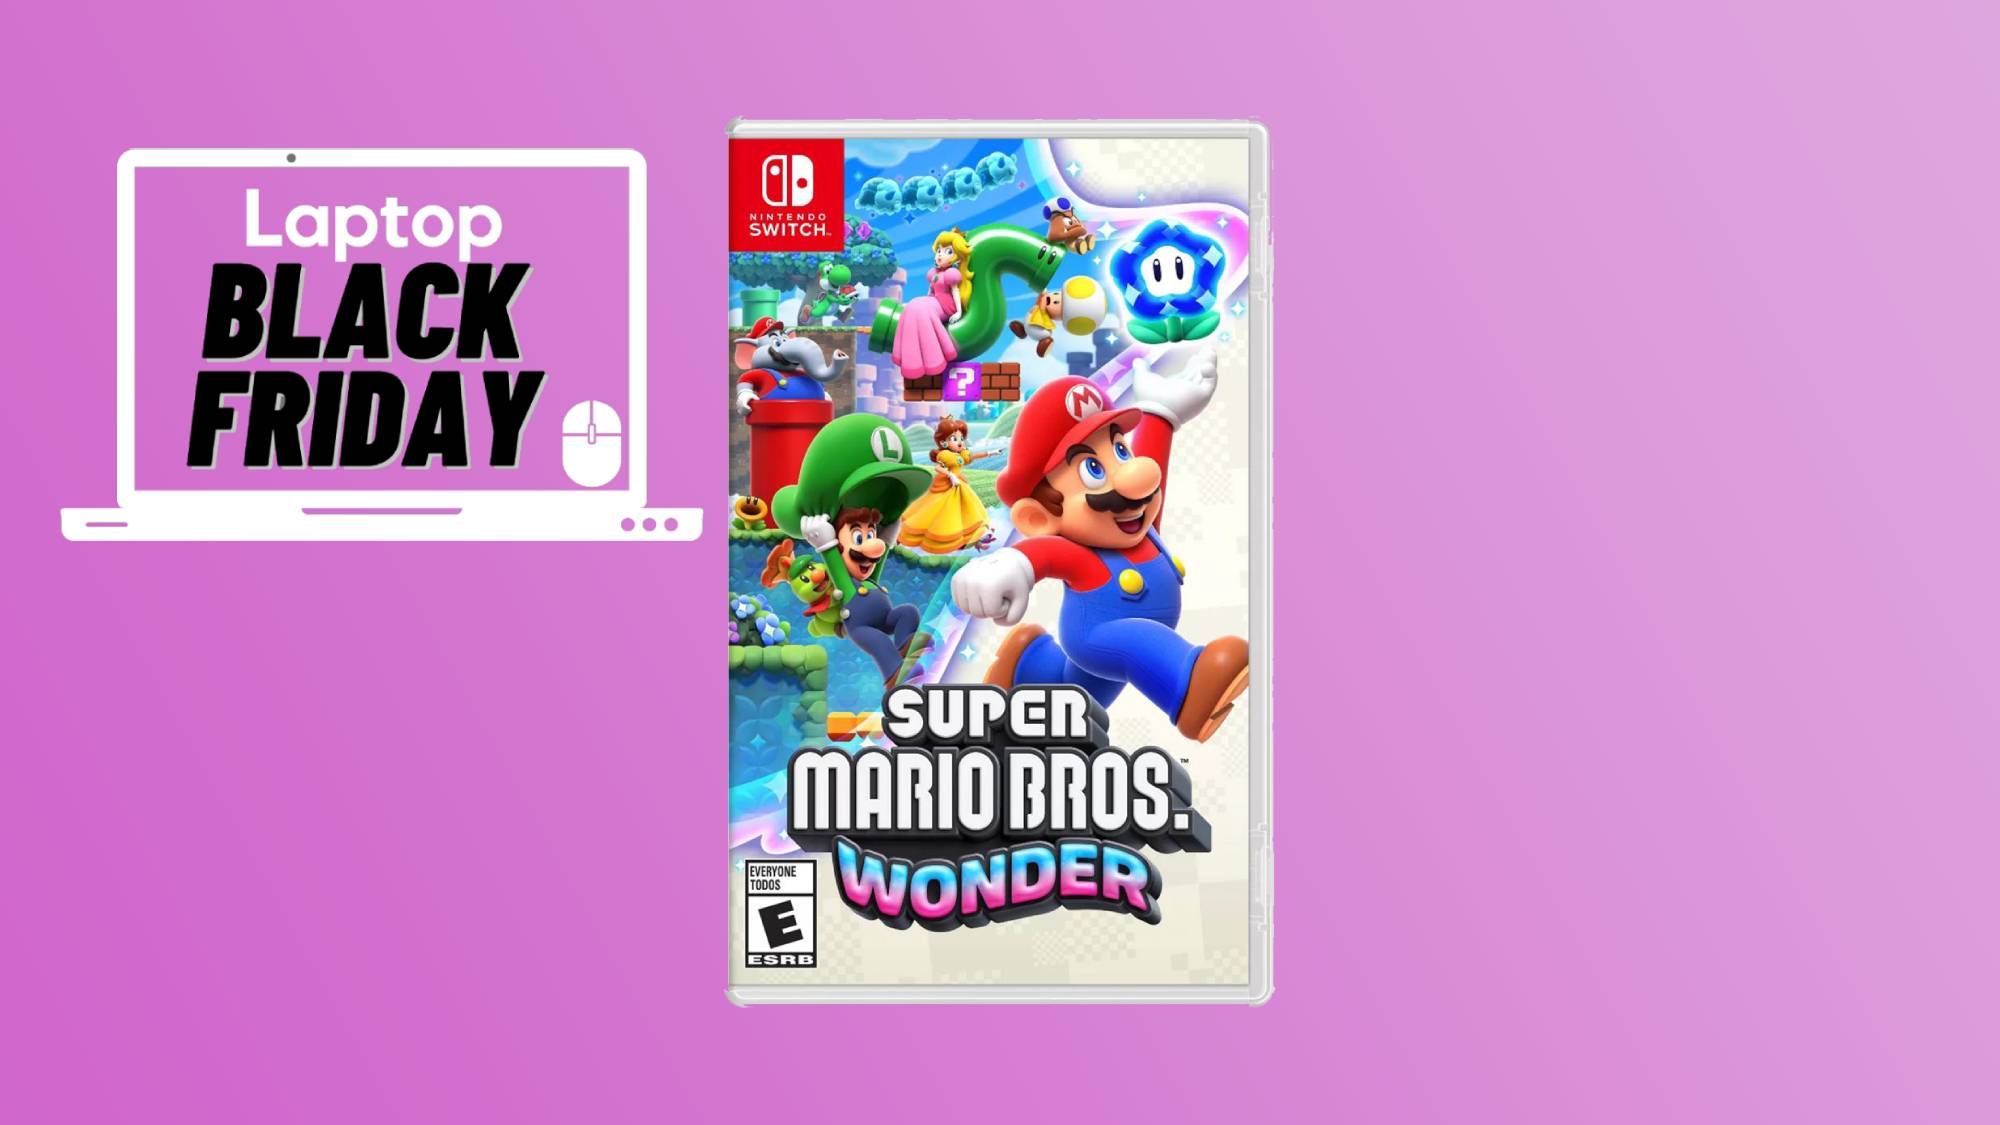 Super Mario Bros. Wonder is $20 off at QVC during Black Friday - Polygon